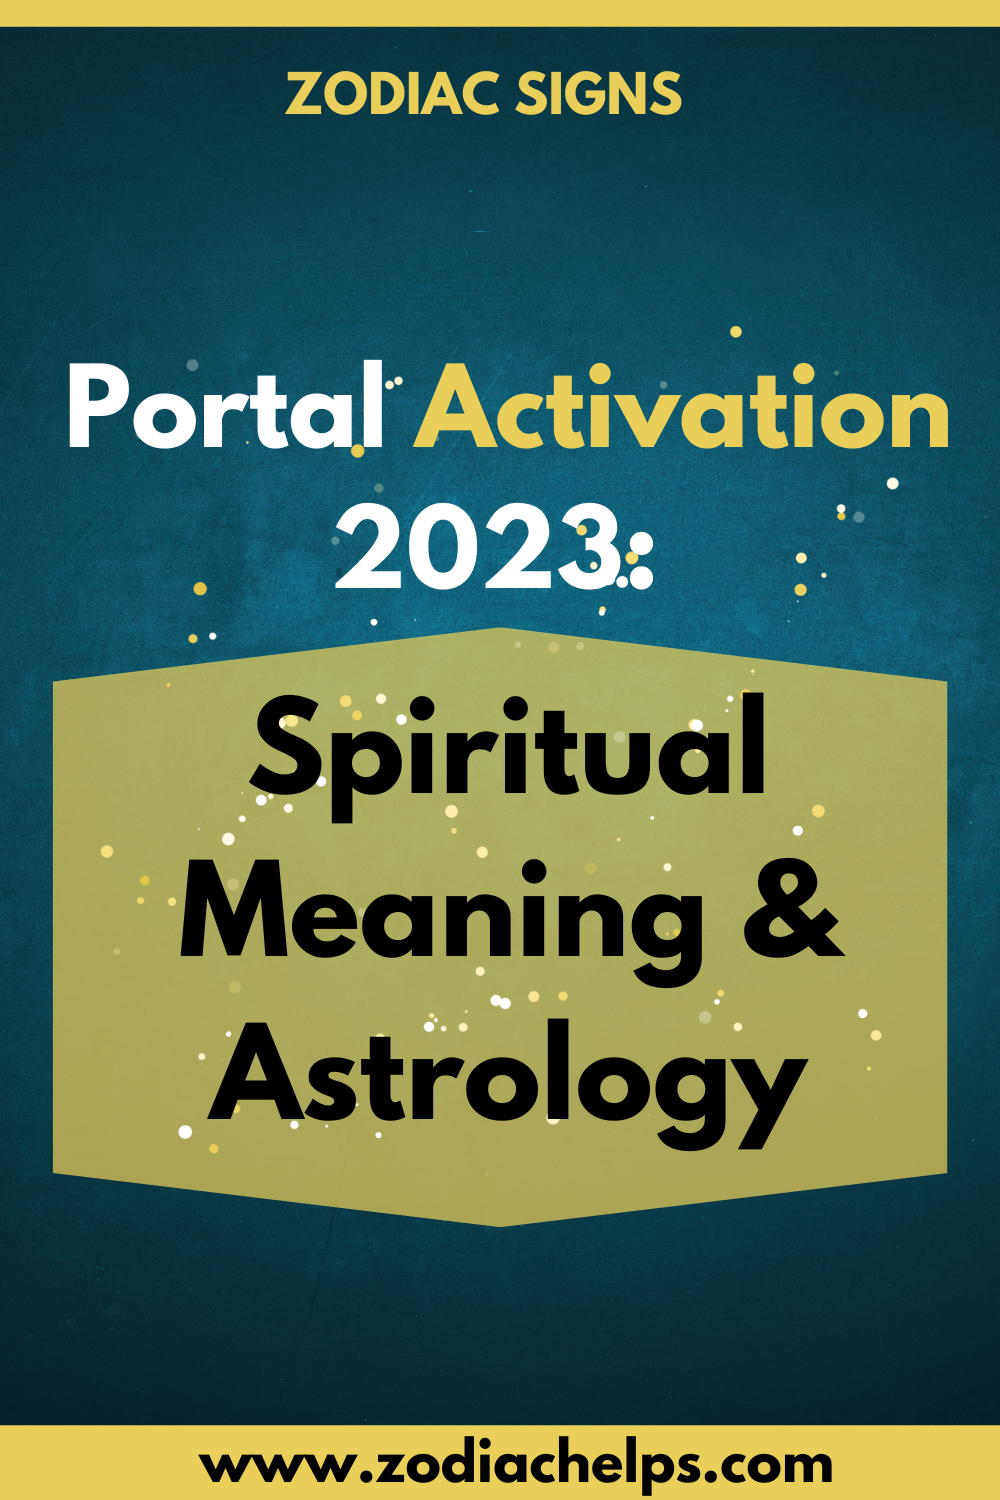 Portal Activation 2023: Spiritual Meaning & Astrology